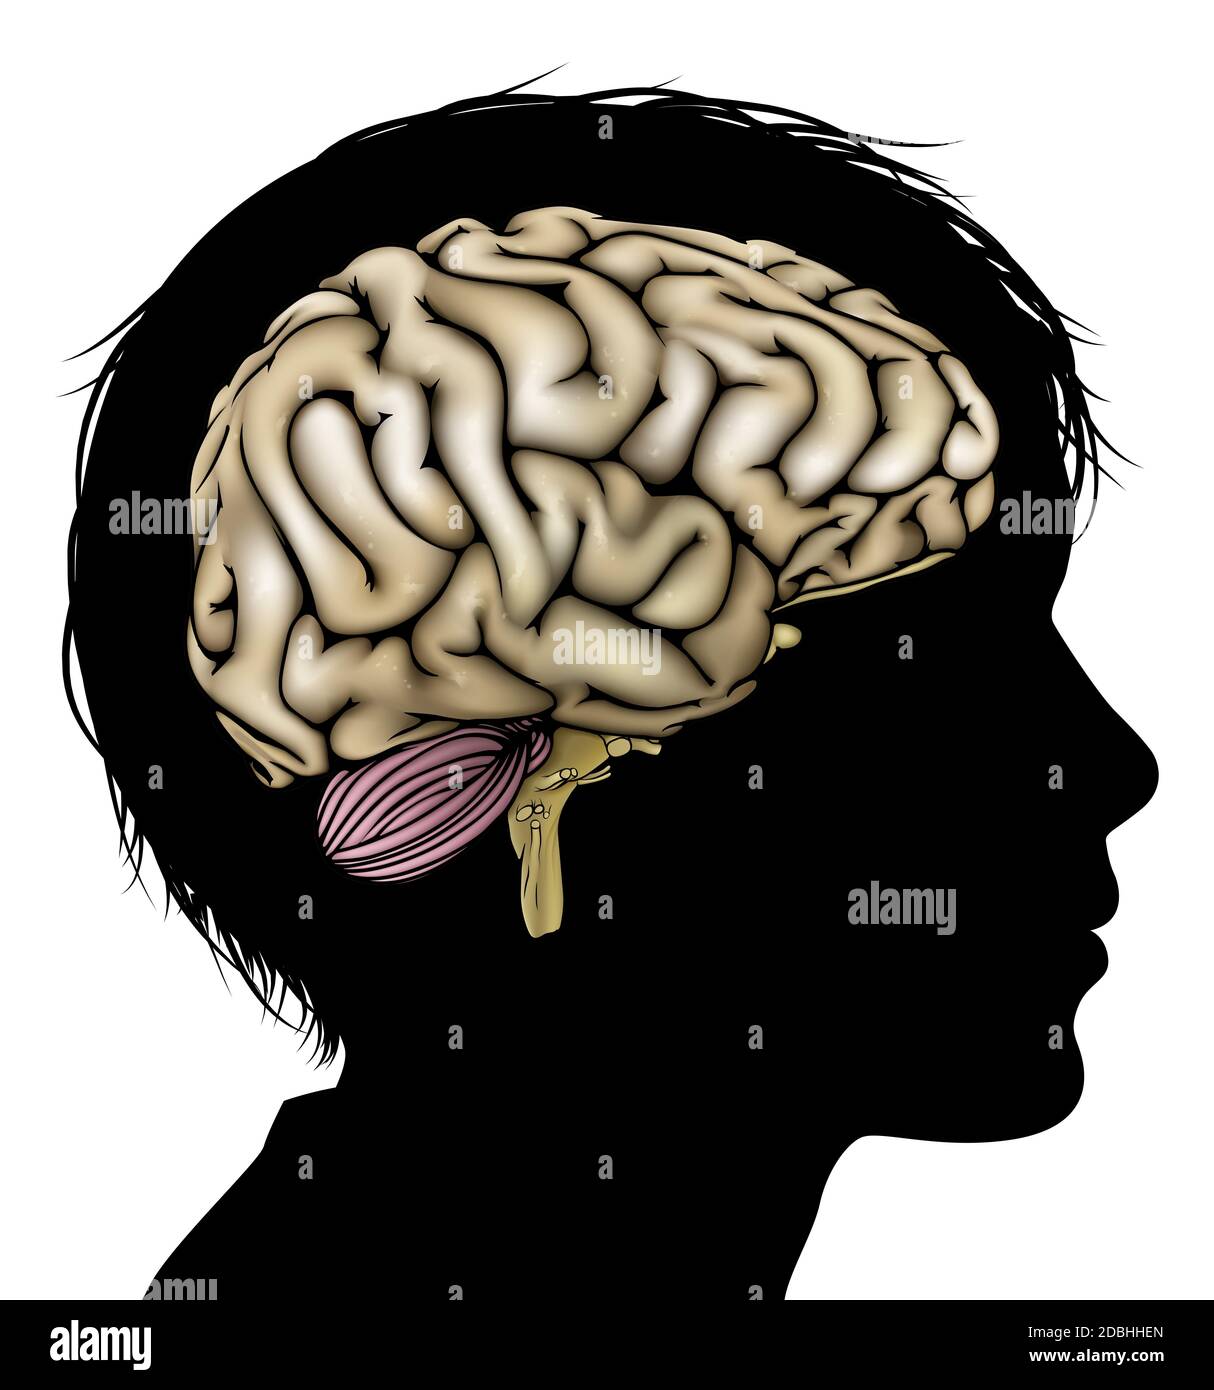 A childs head in silhouette with brain. Concept for child mental, psychological development, brain development, learning and education or other medica Stock Photo